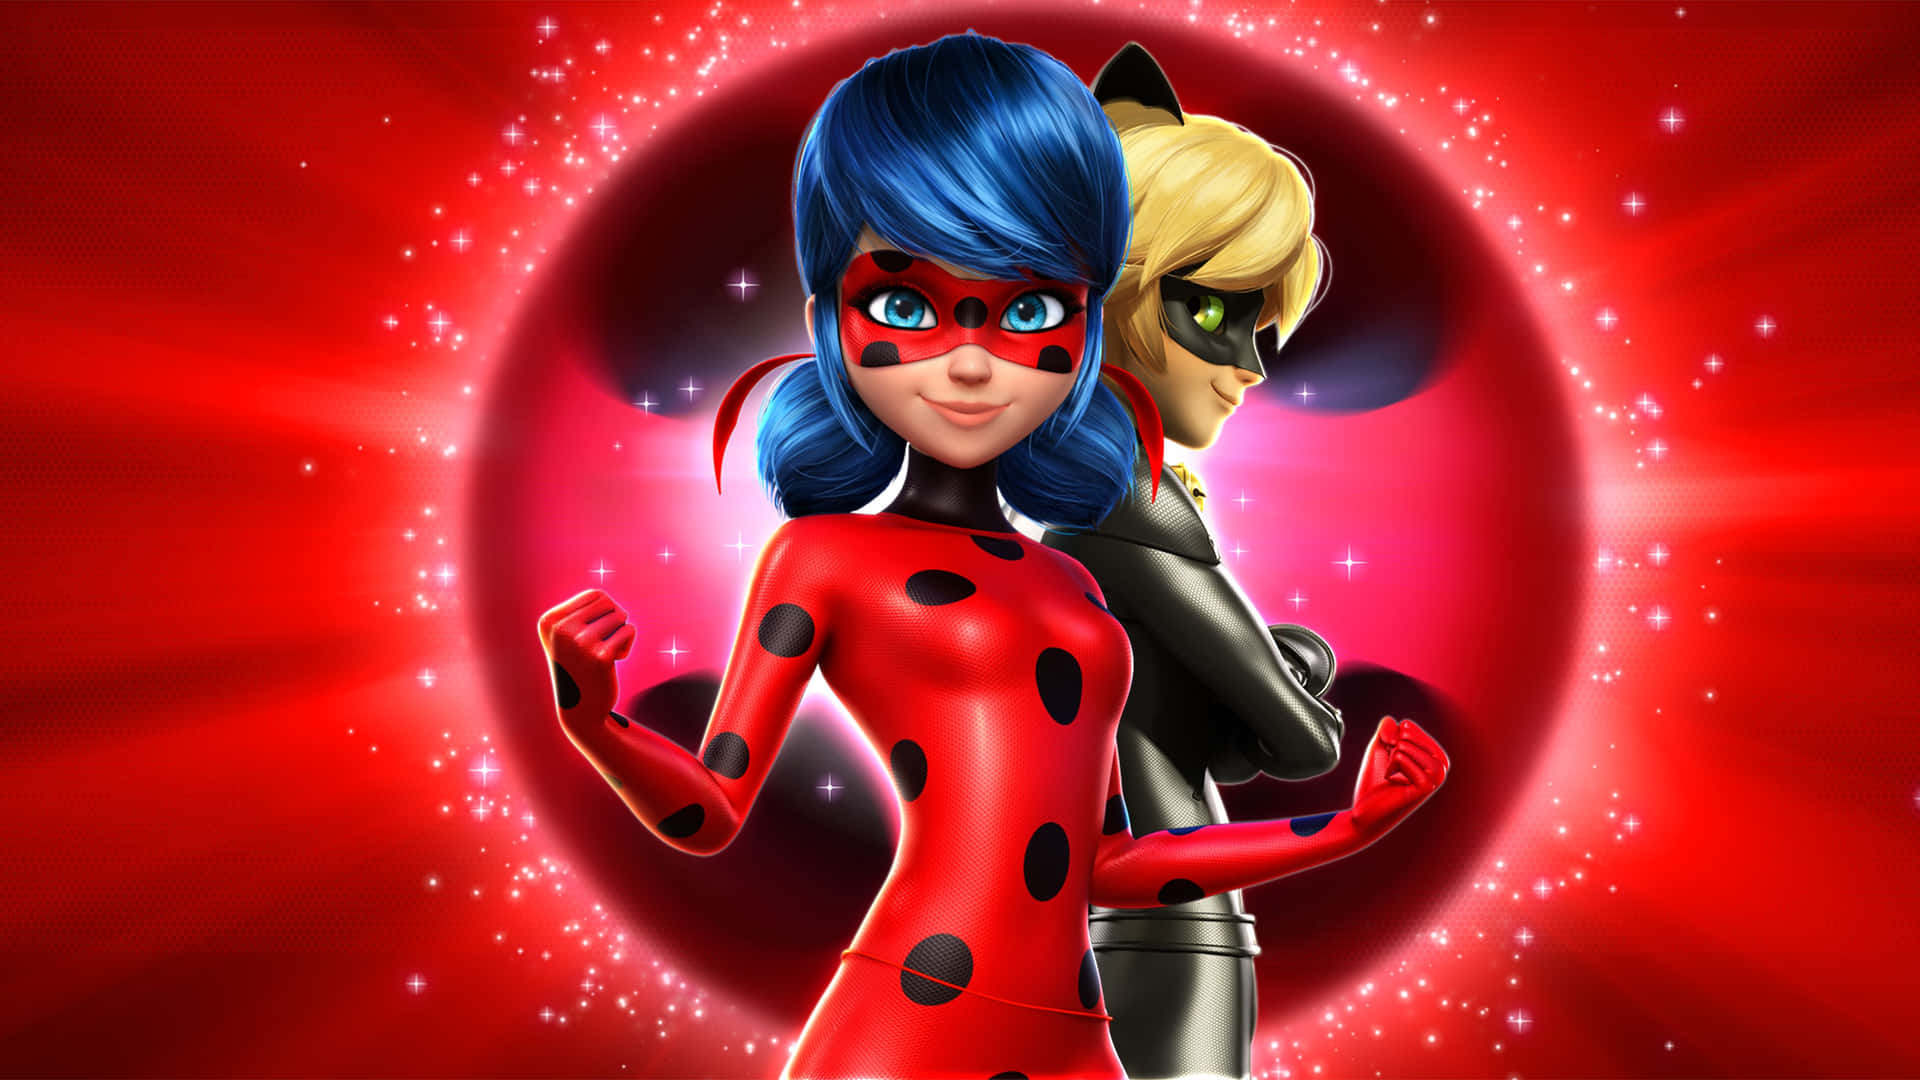 angela phelps recommends miraculous ladybug images pic